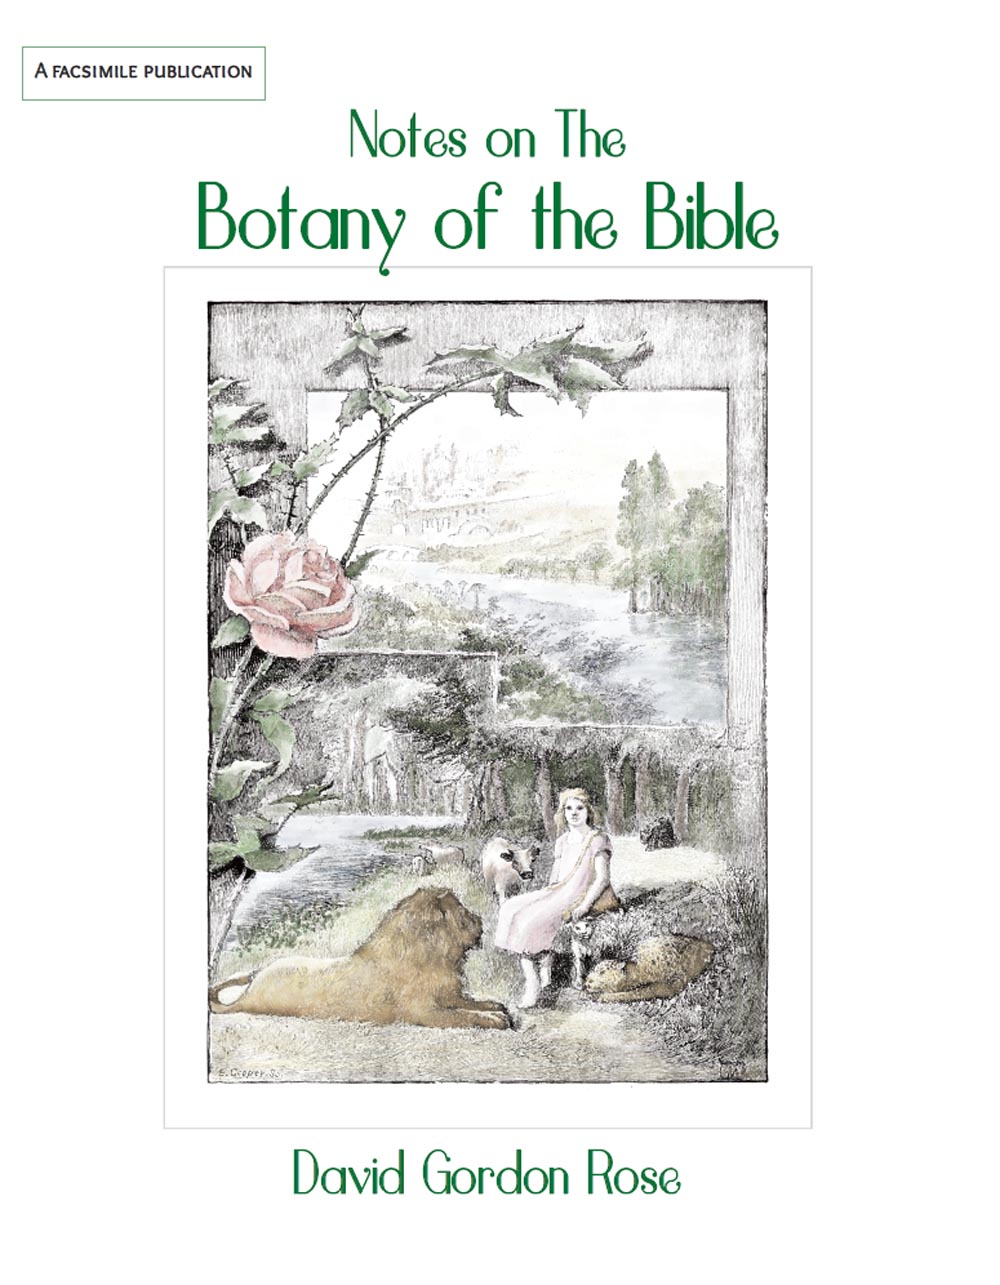 Notes on the Botany of the Bible FRONT COVER